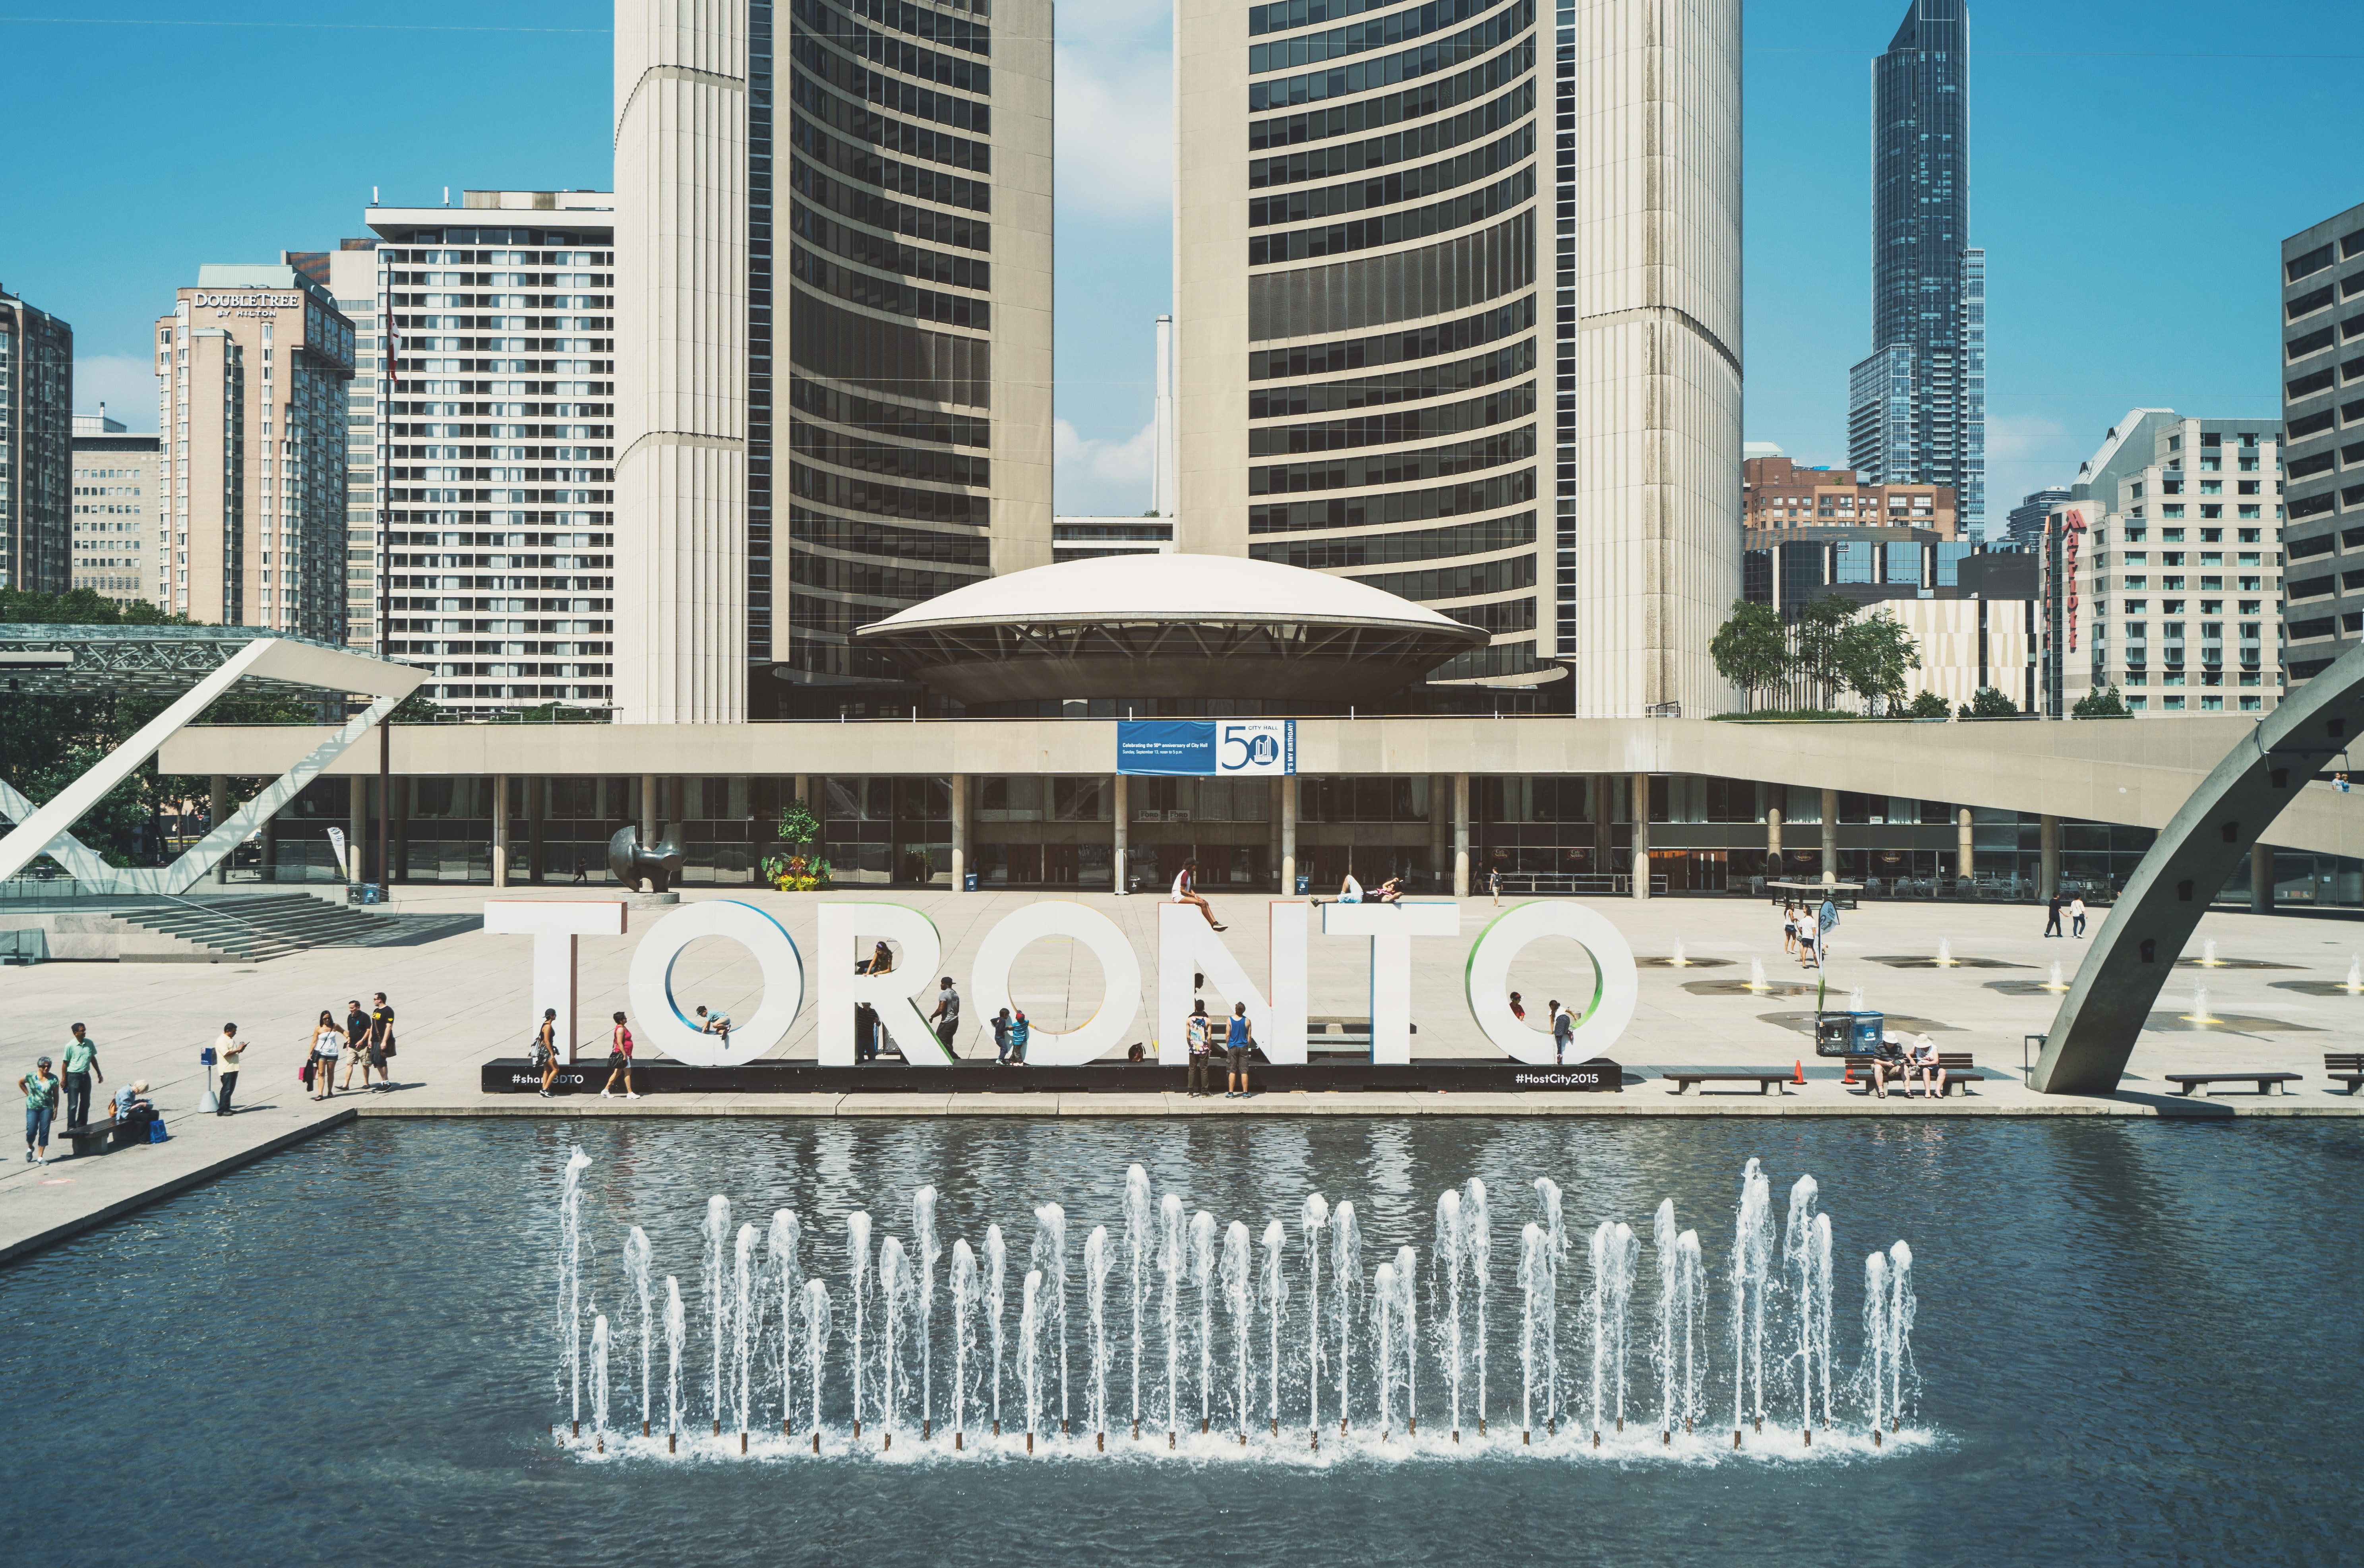 The Toronto sign behind a beautiful fountain piece